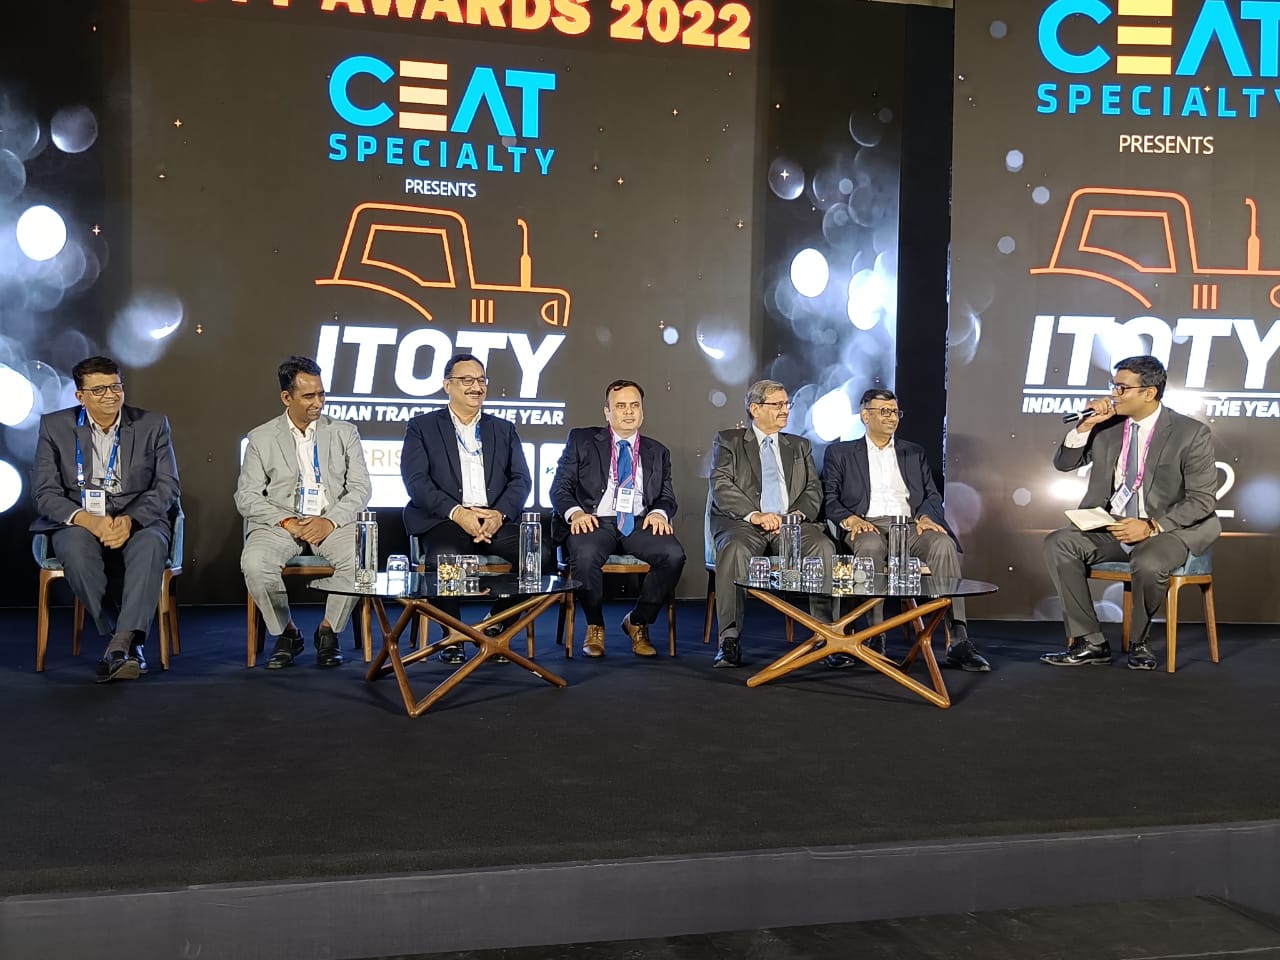 Tractor Junction in association with CEAT Specialty announces winners of India’s tractor of the year 2022